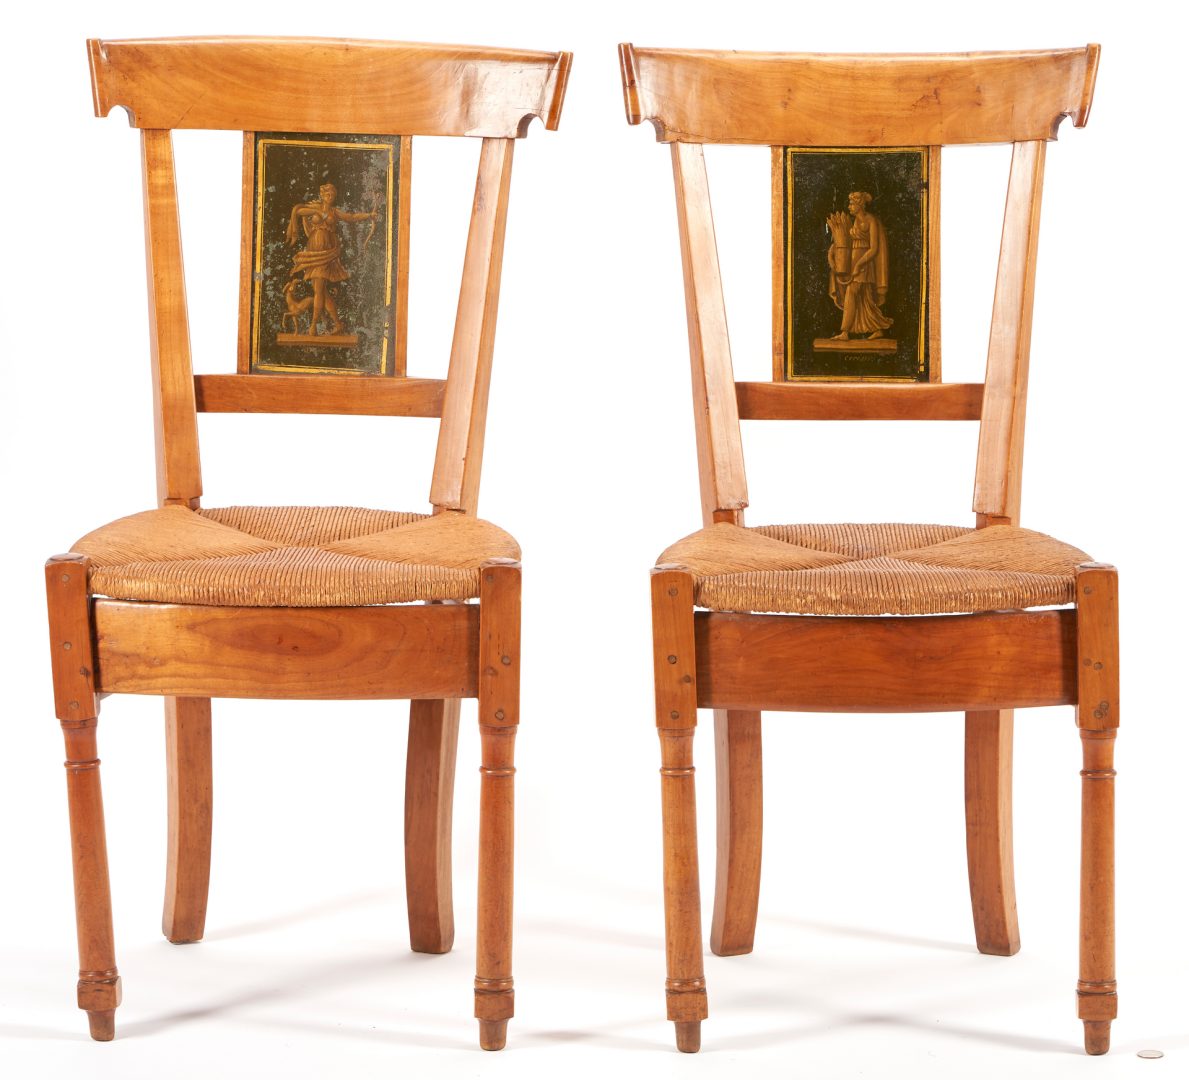 Lot 280: Group of 6 European Chairs w/ Classical Motifs